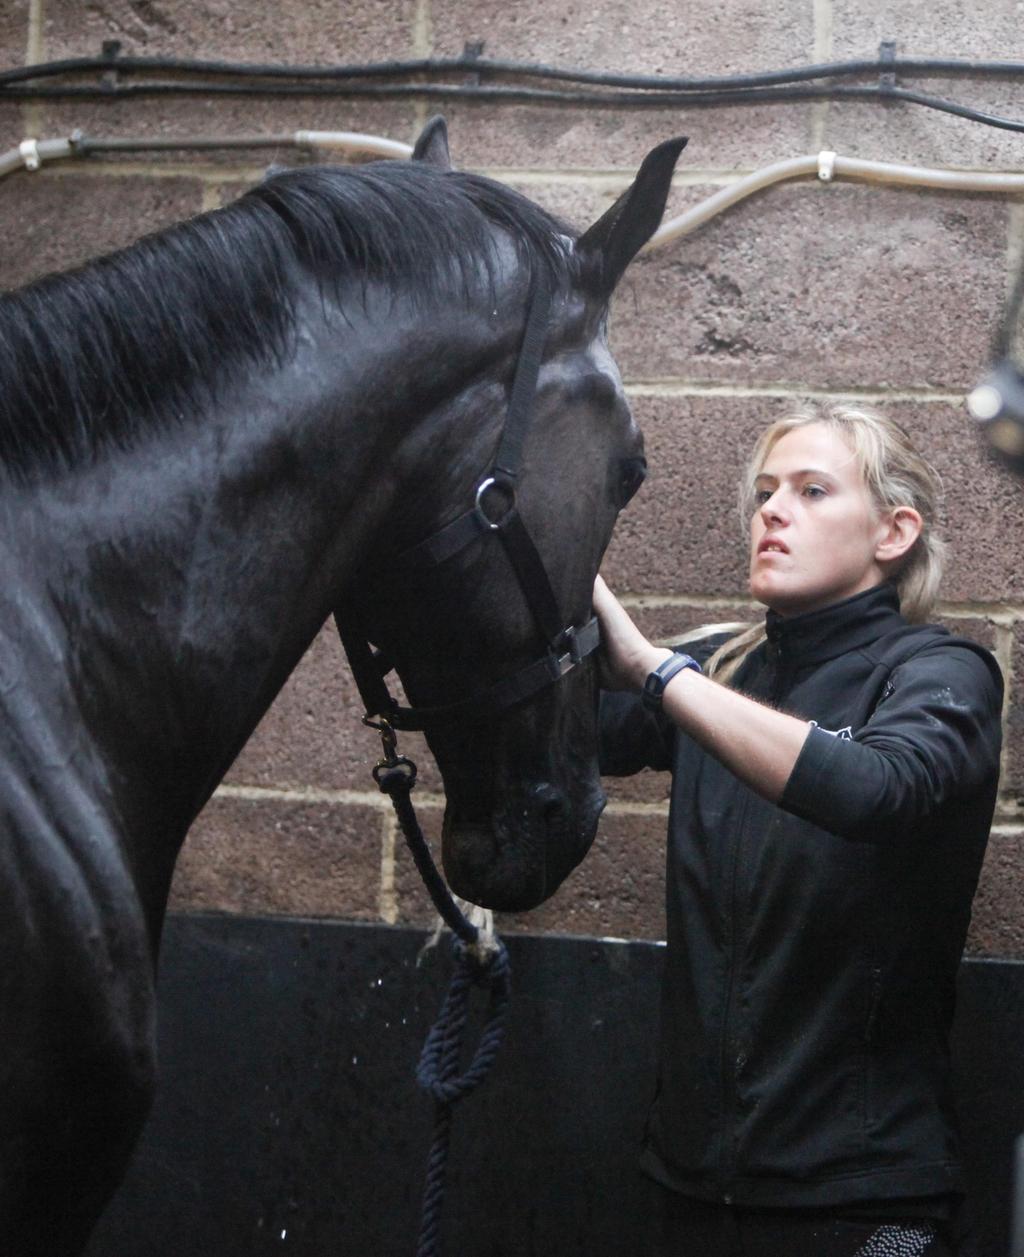 COURSE DESCRIPTION AND REQUIREMENTS The Aim of this course is to give you all round, work based experience and knowledge to gain a career in the Equine Industry.